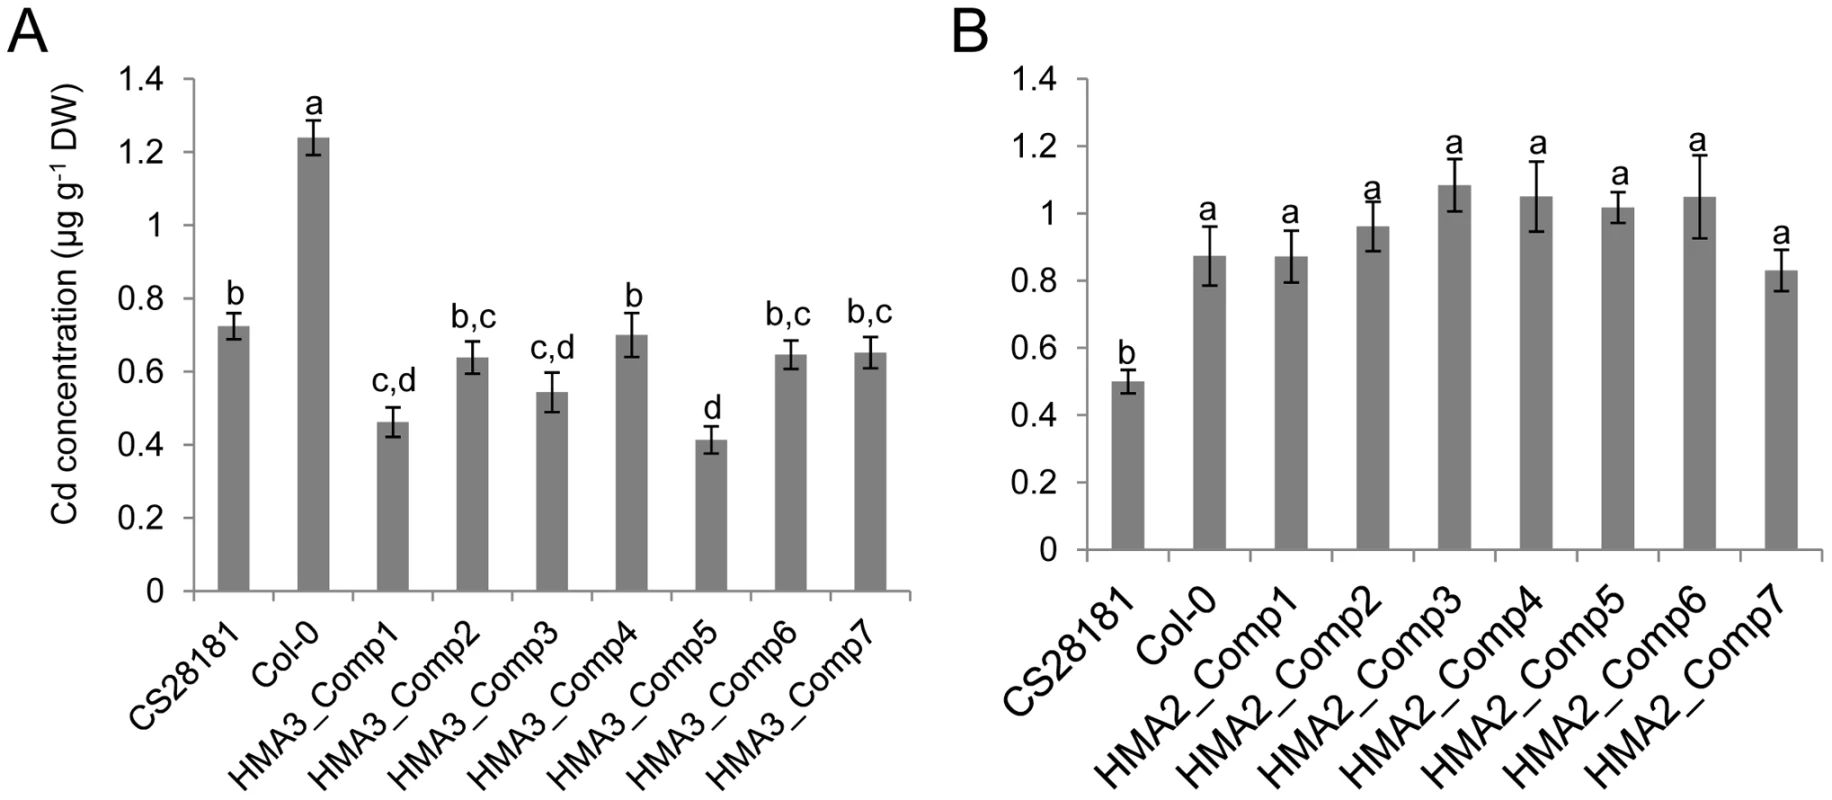 Transgenic complementation of the high leaf Cd phenotype of <i>A. thaliana</i> Col-0.